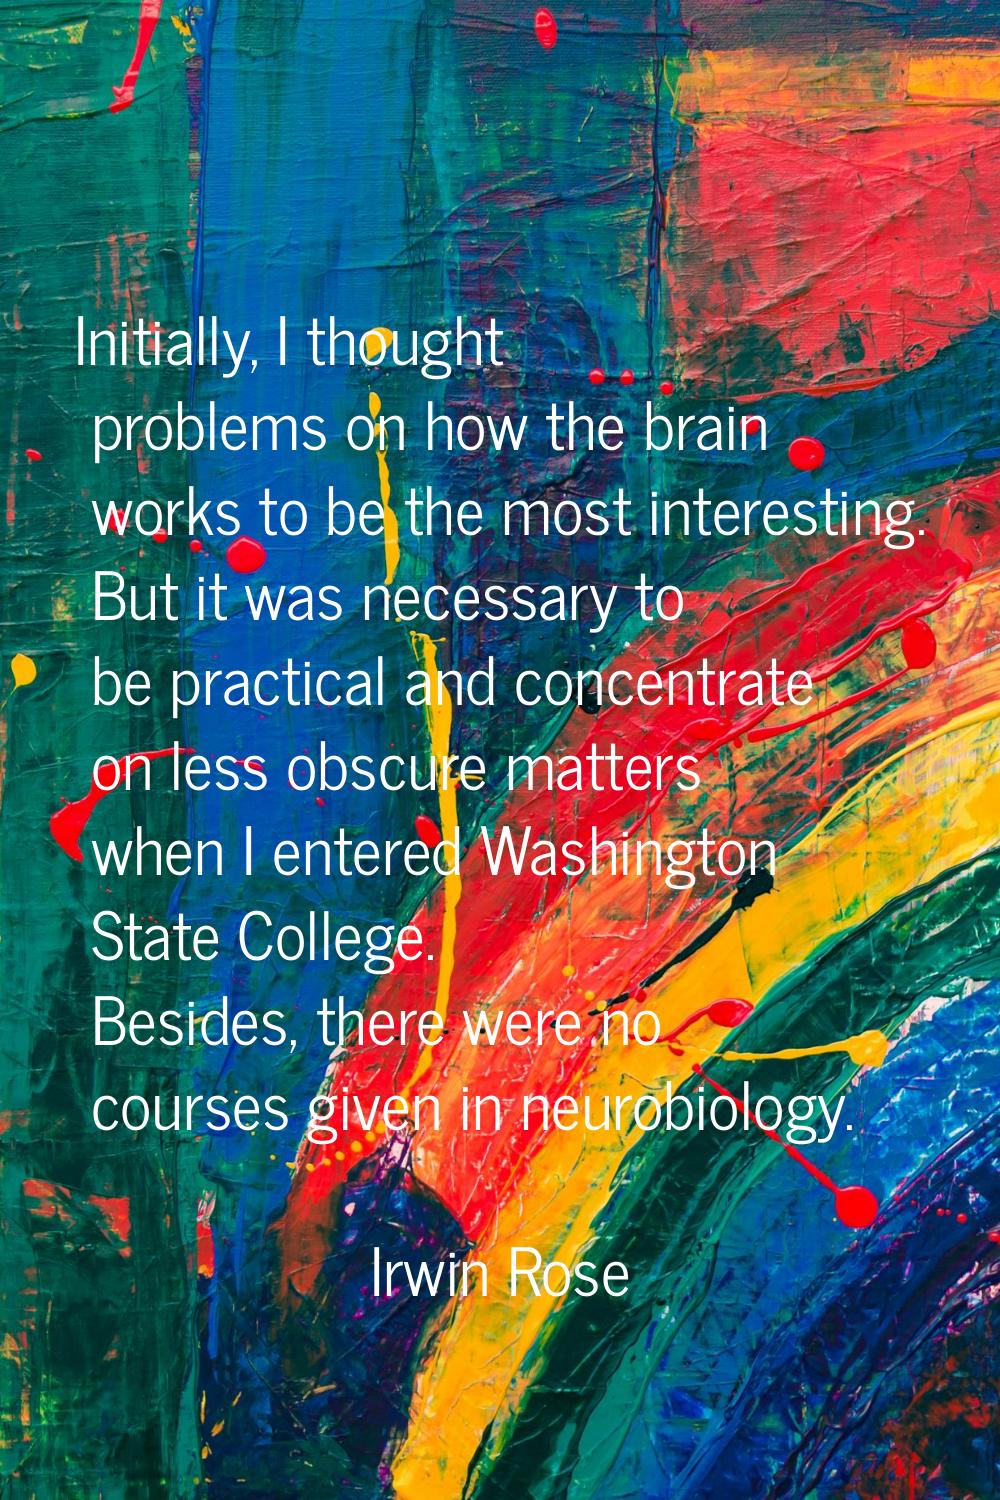 Initially, I thought problems on how the brain works to be the most interesting. But it was necessa